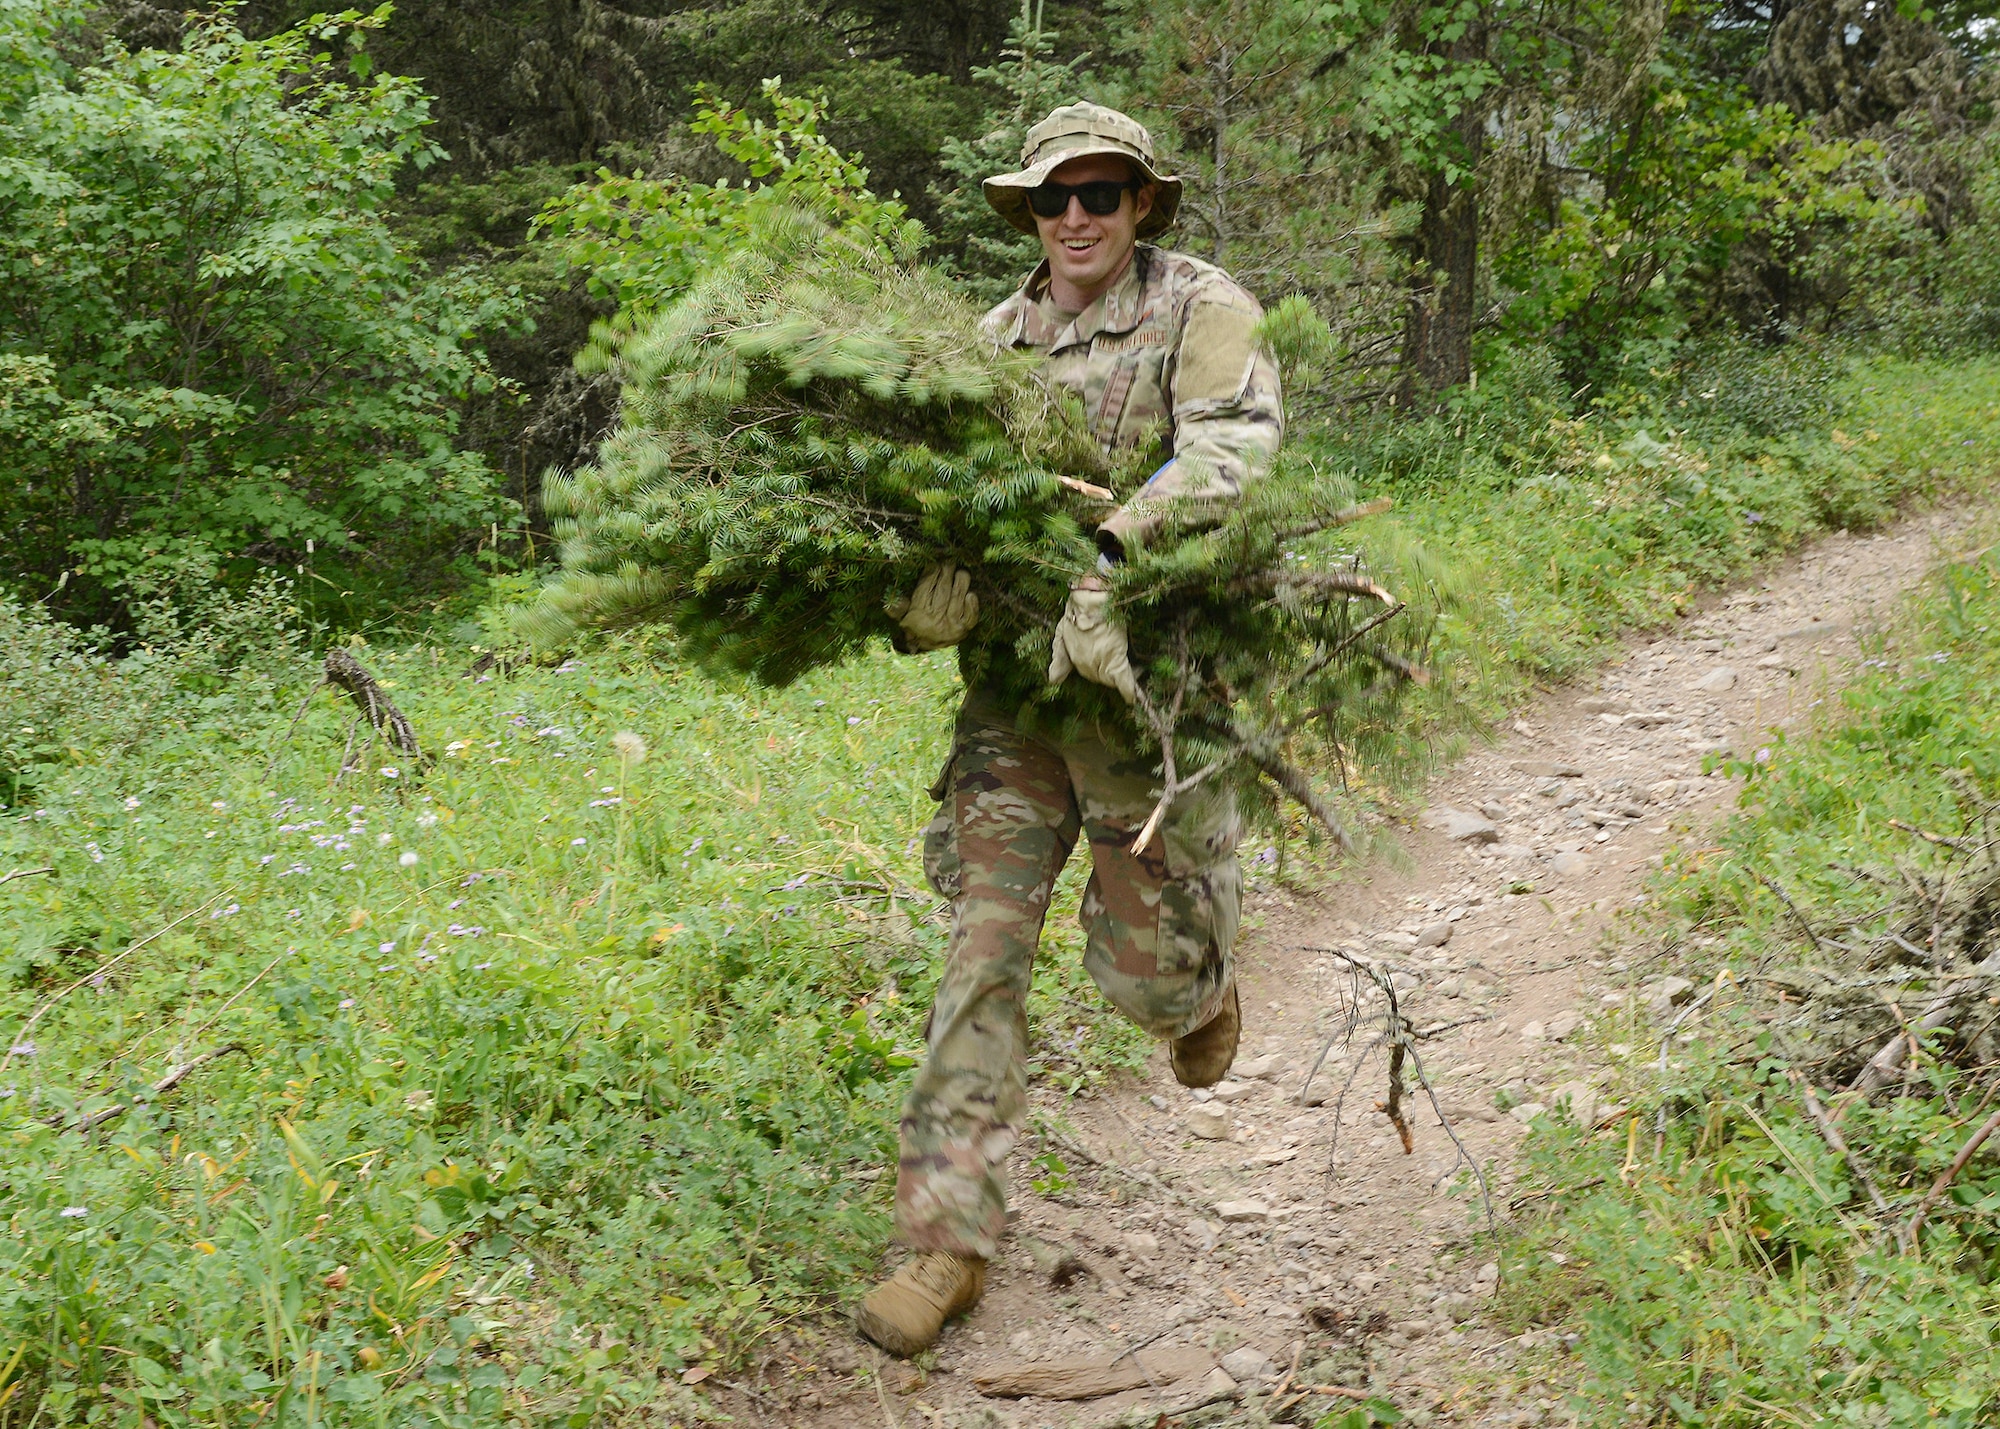 A man in military uniform runs towards the camera with arms full of pine boughs.